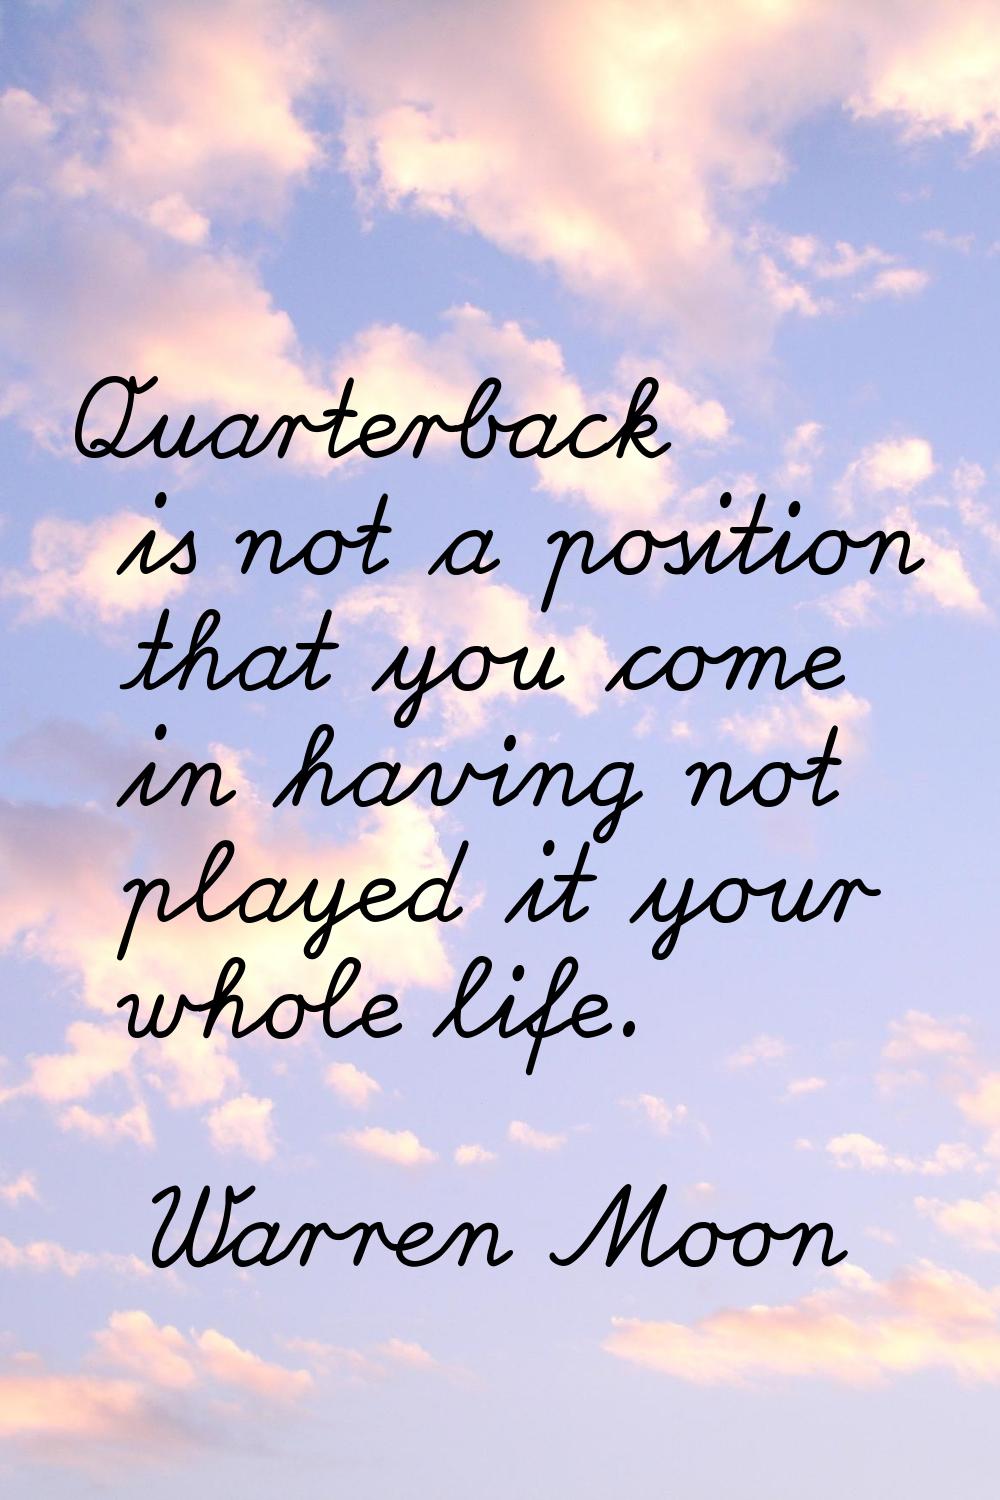 Quarterback is not a position that you come in having not played it your whole life.